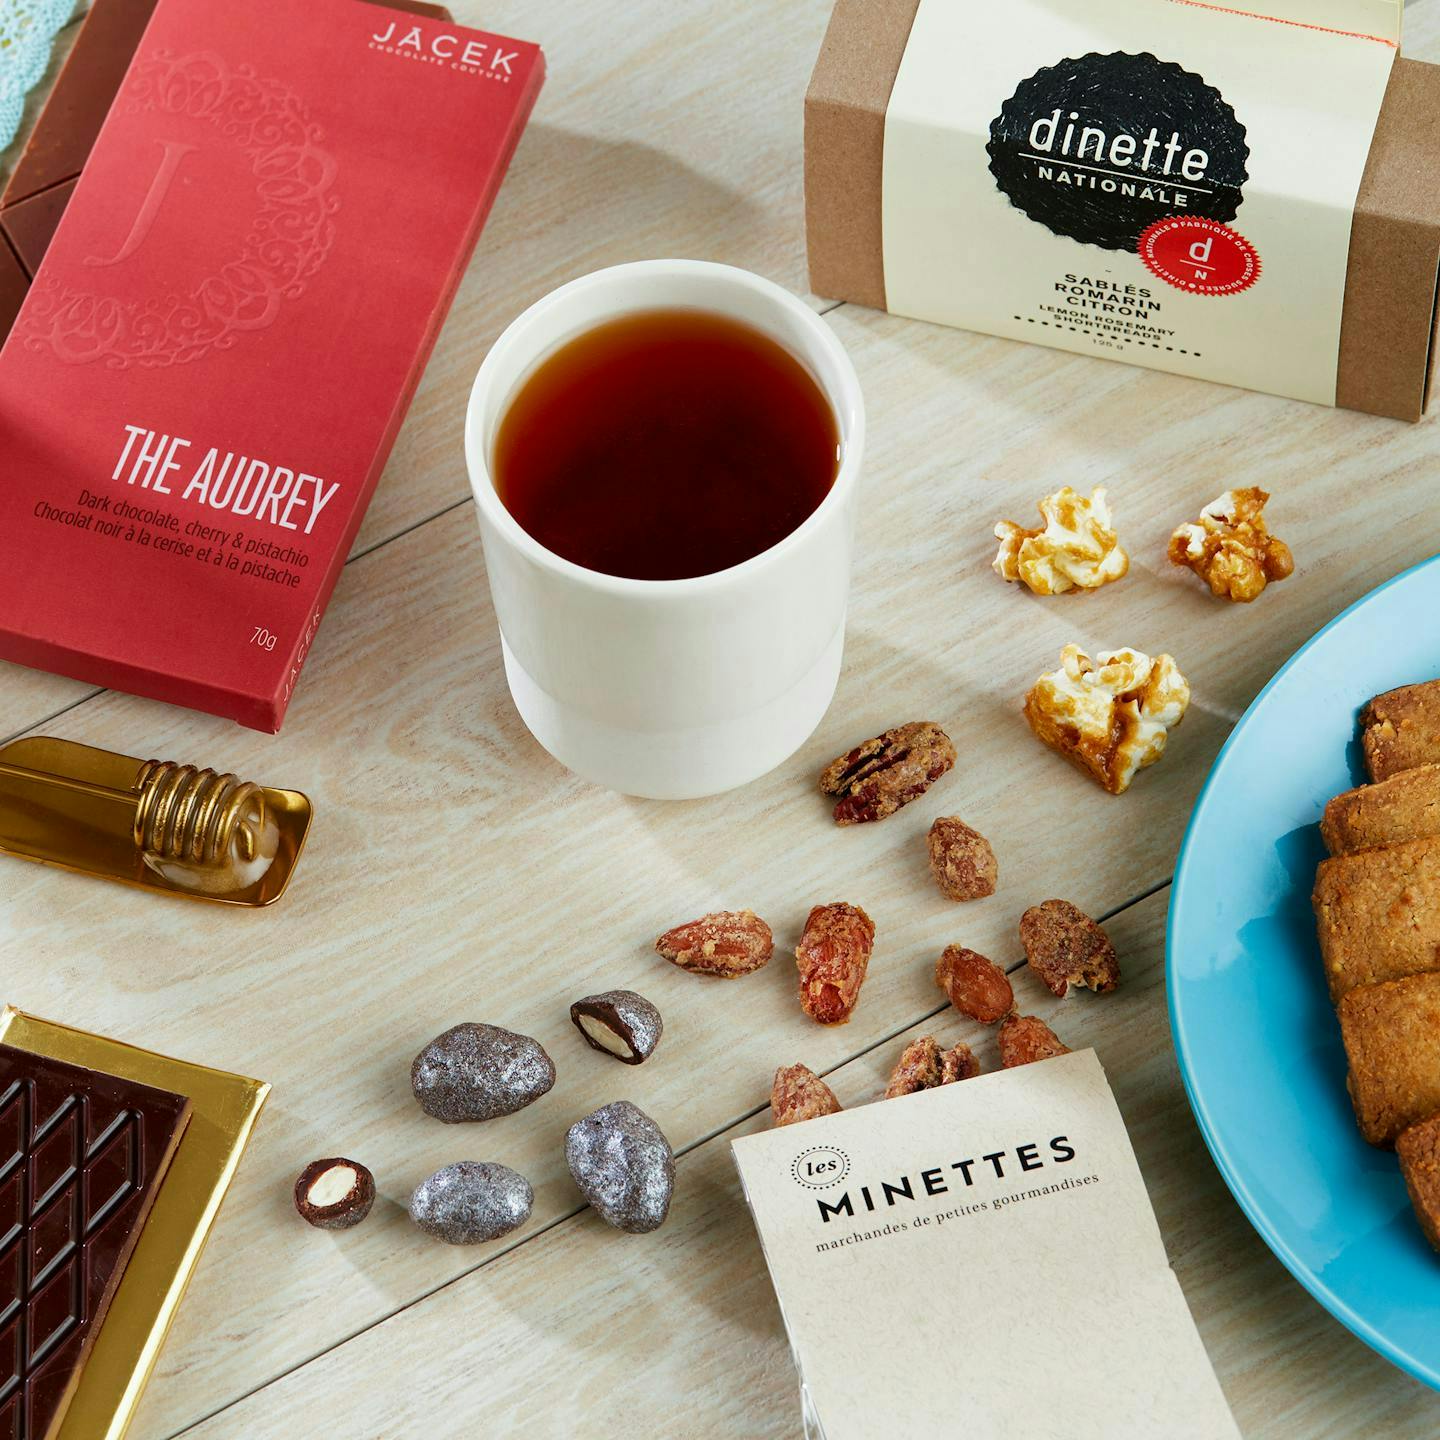 Tea and treats from Dinette Nationale and Les Minettes